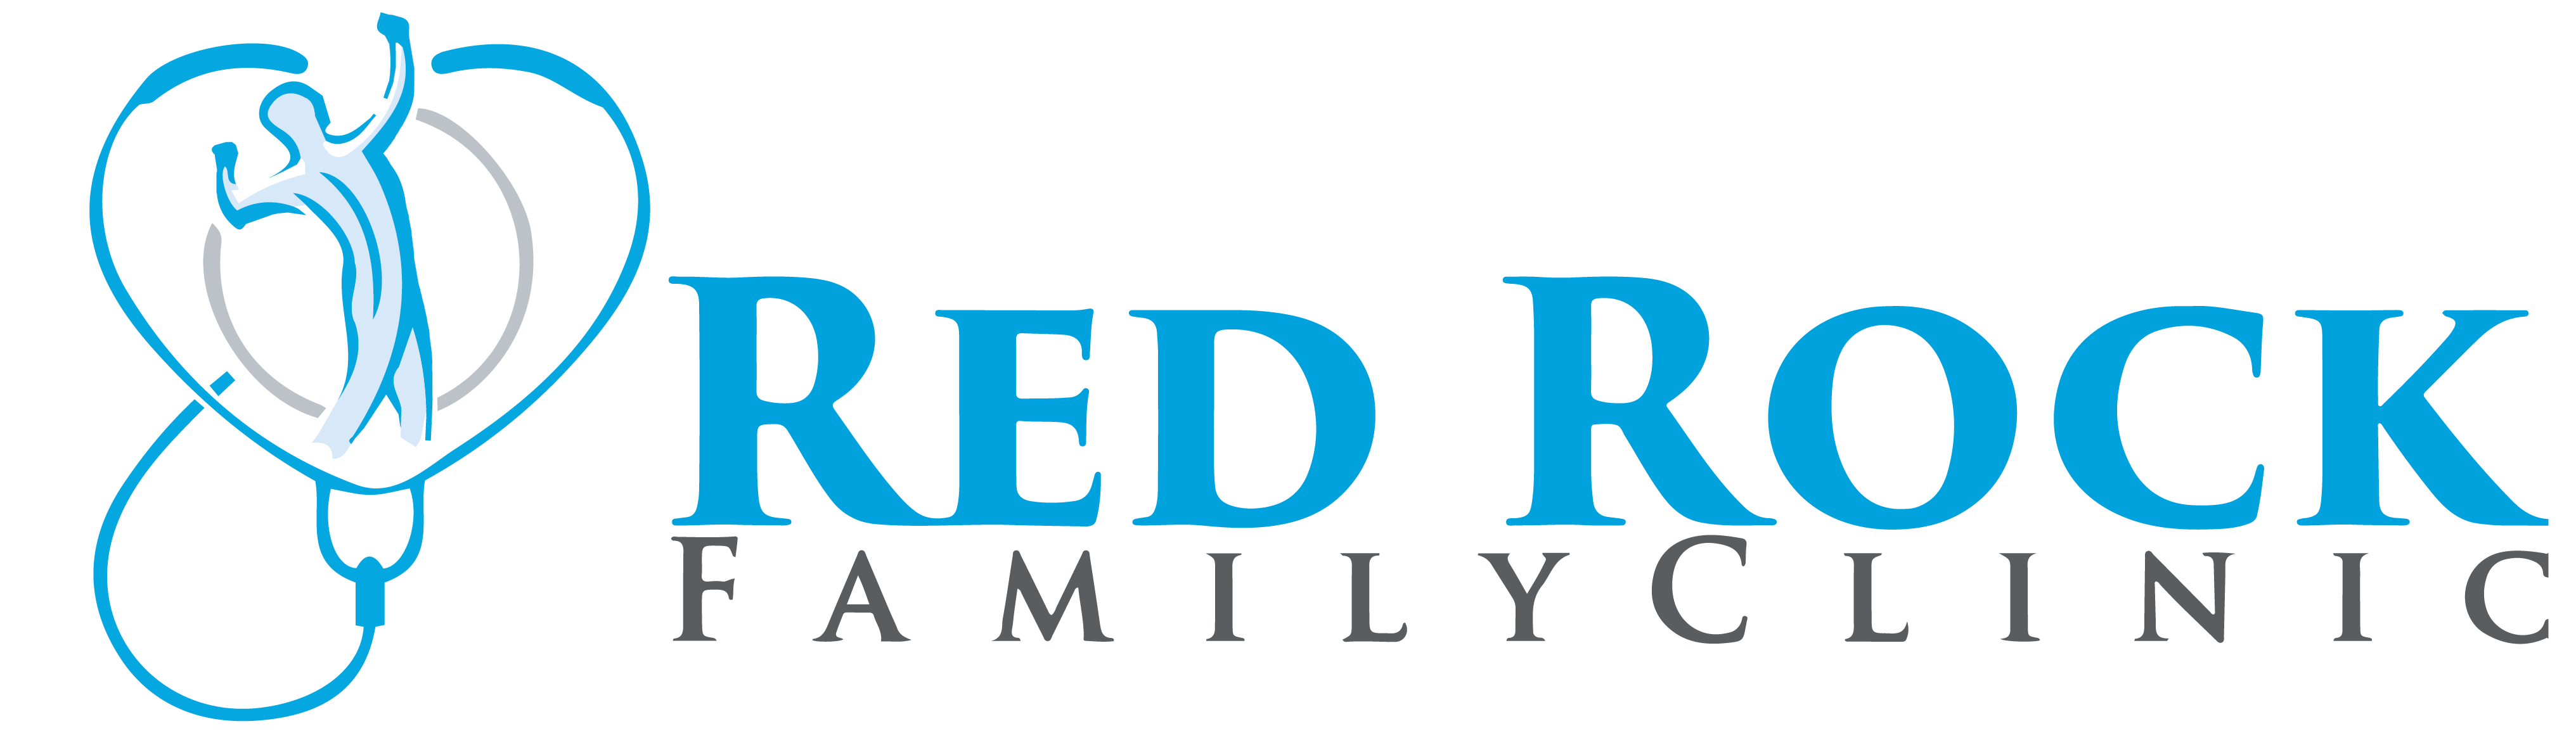 Red Rock Family Clinic